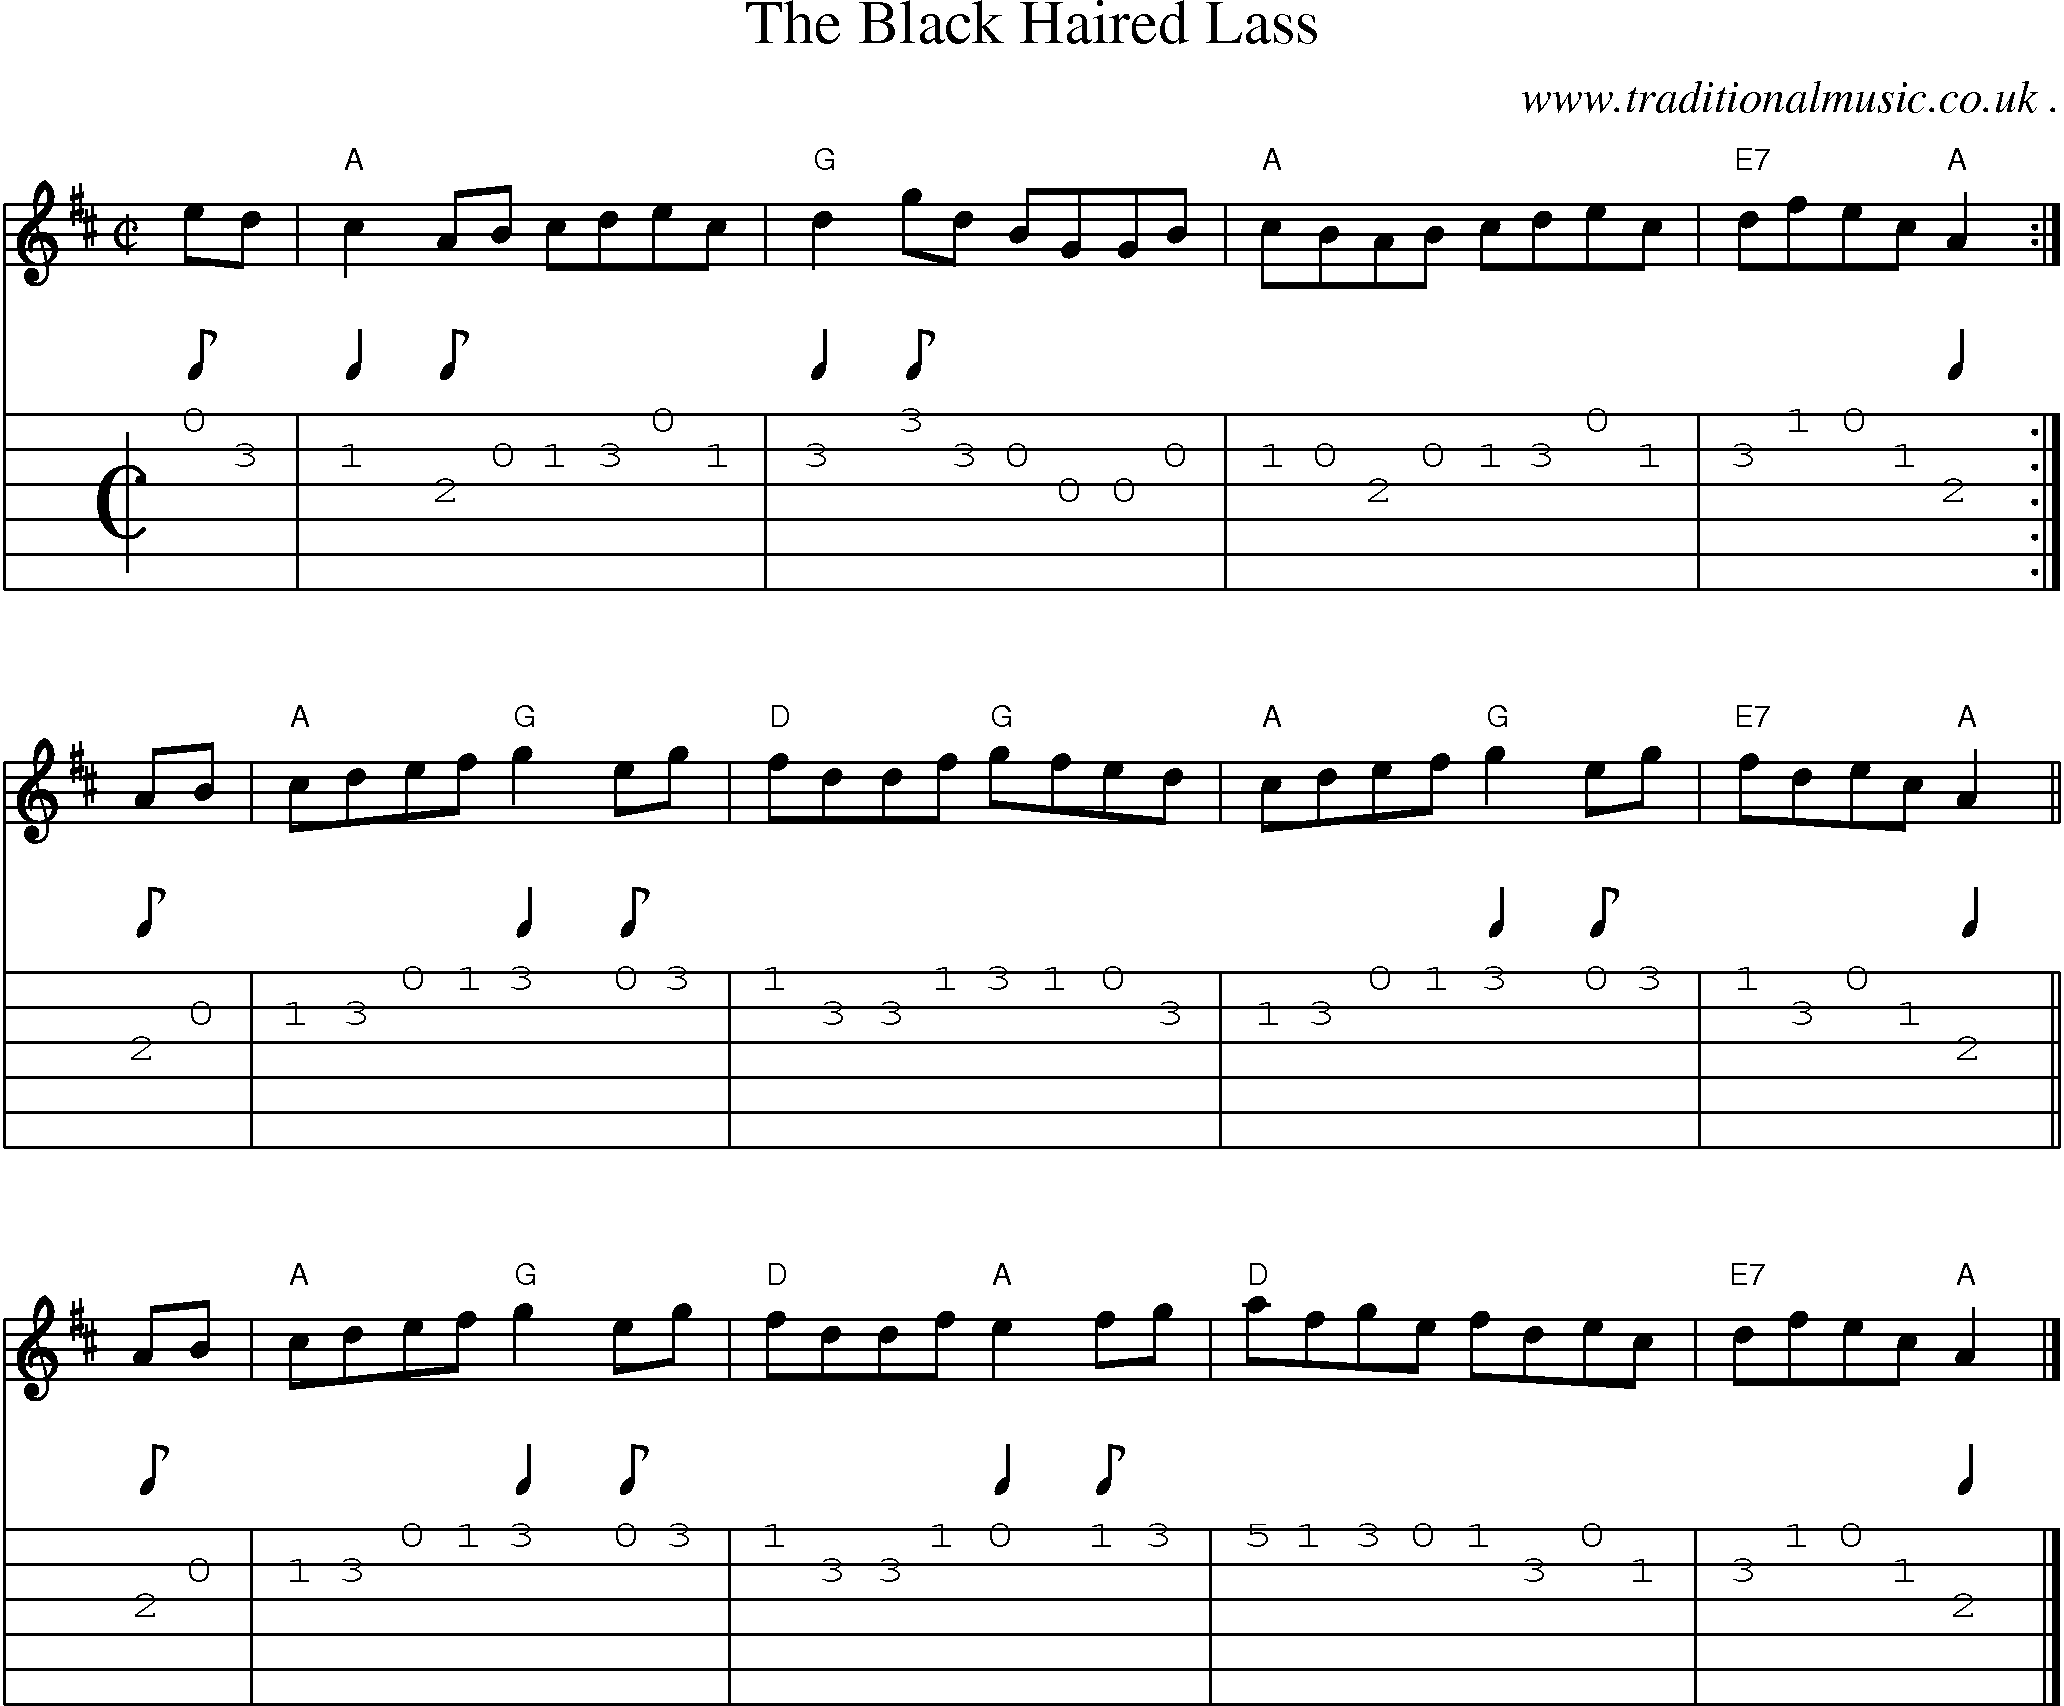 Sheet-music  score, Chords and Guitar Tabs for The Black Haired Lass